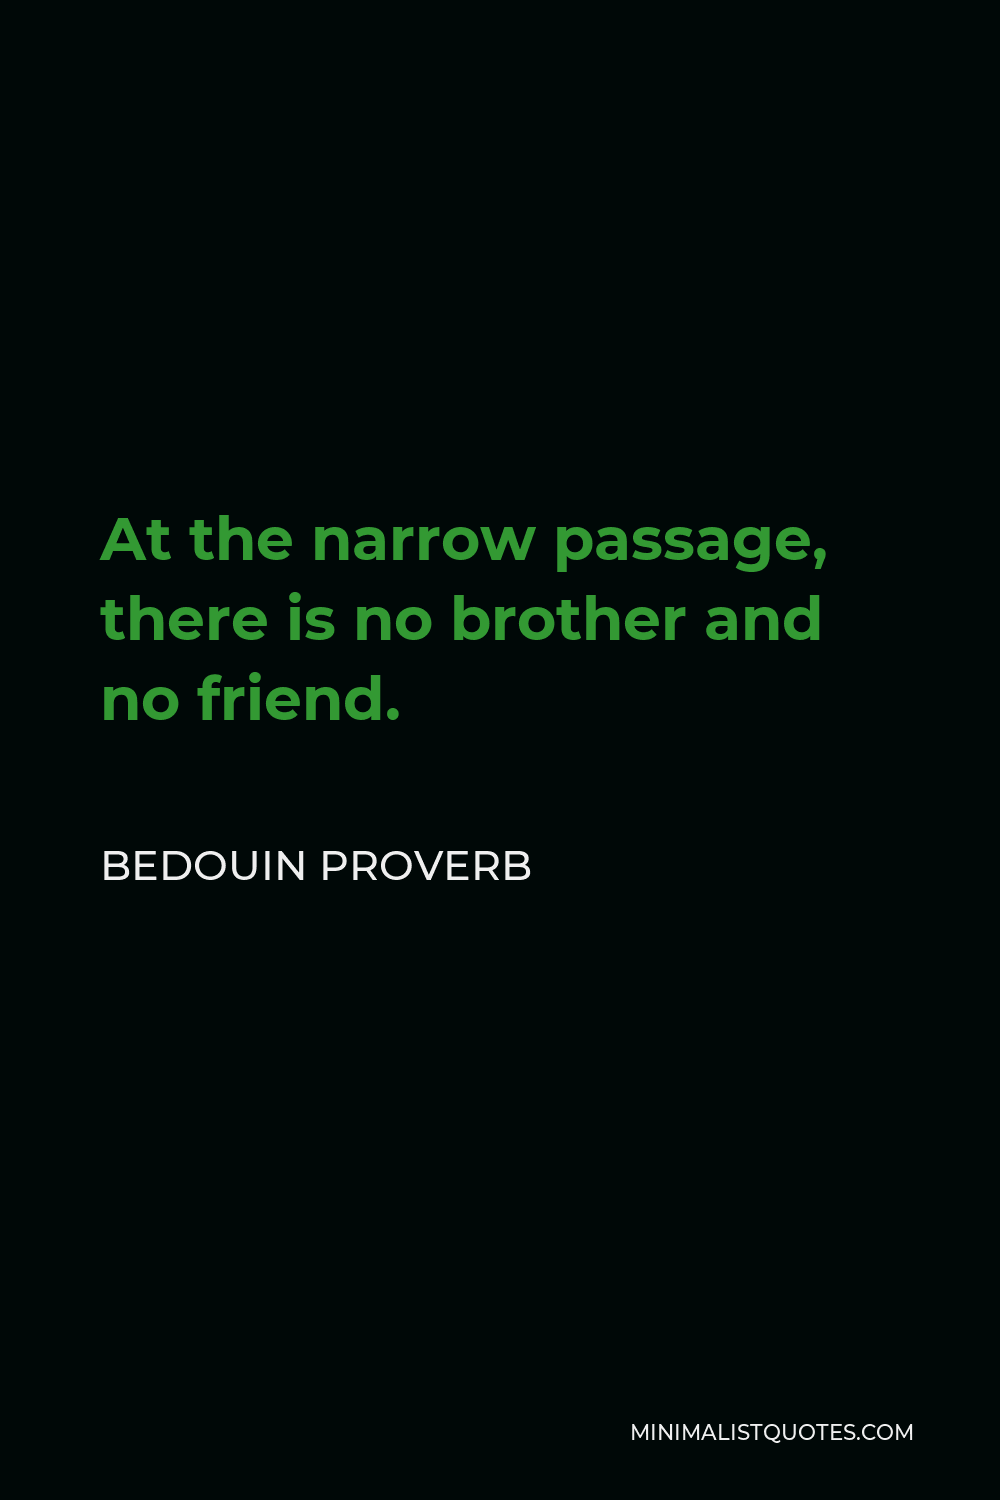 Bedouin Proverb Quote - At the narrow passage, there is no brother and no friend.